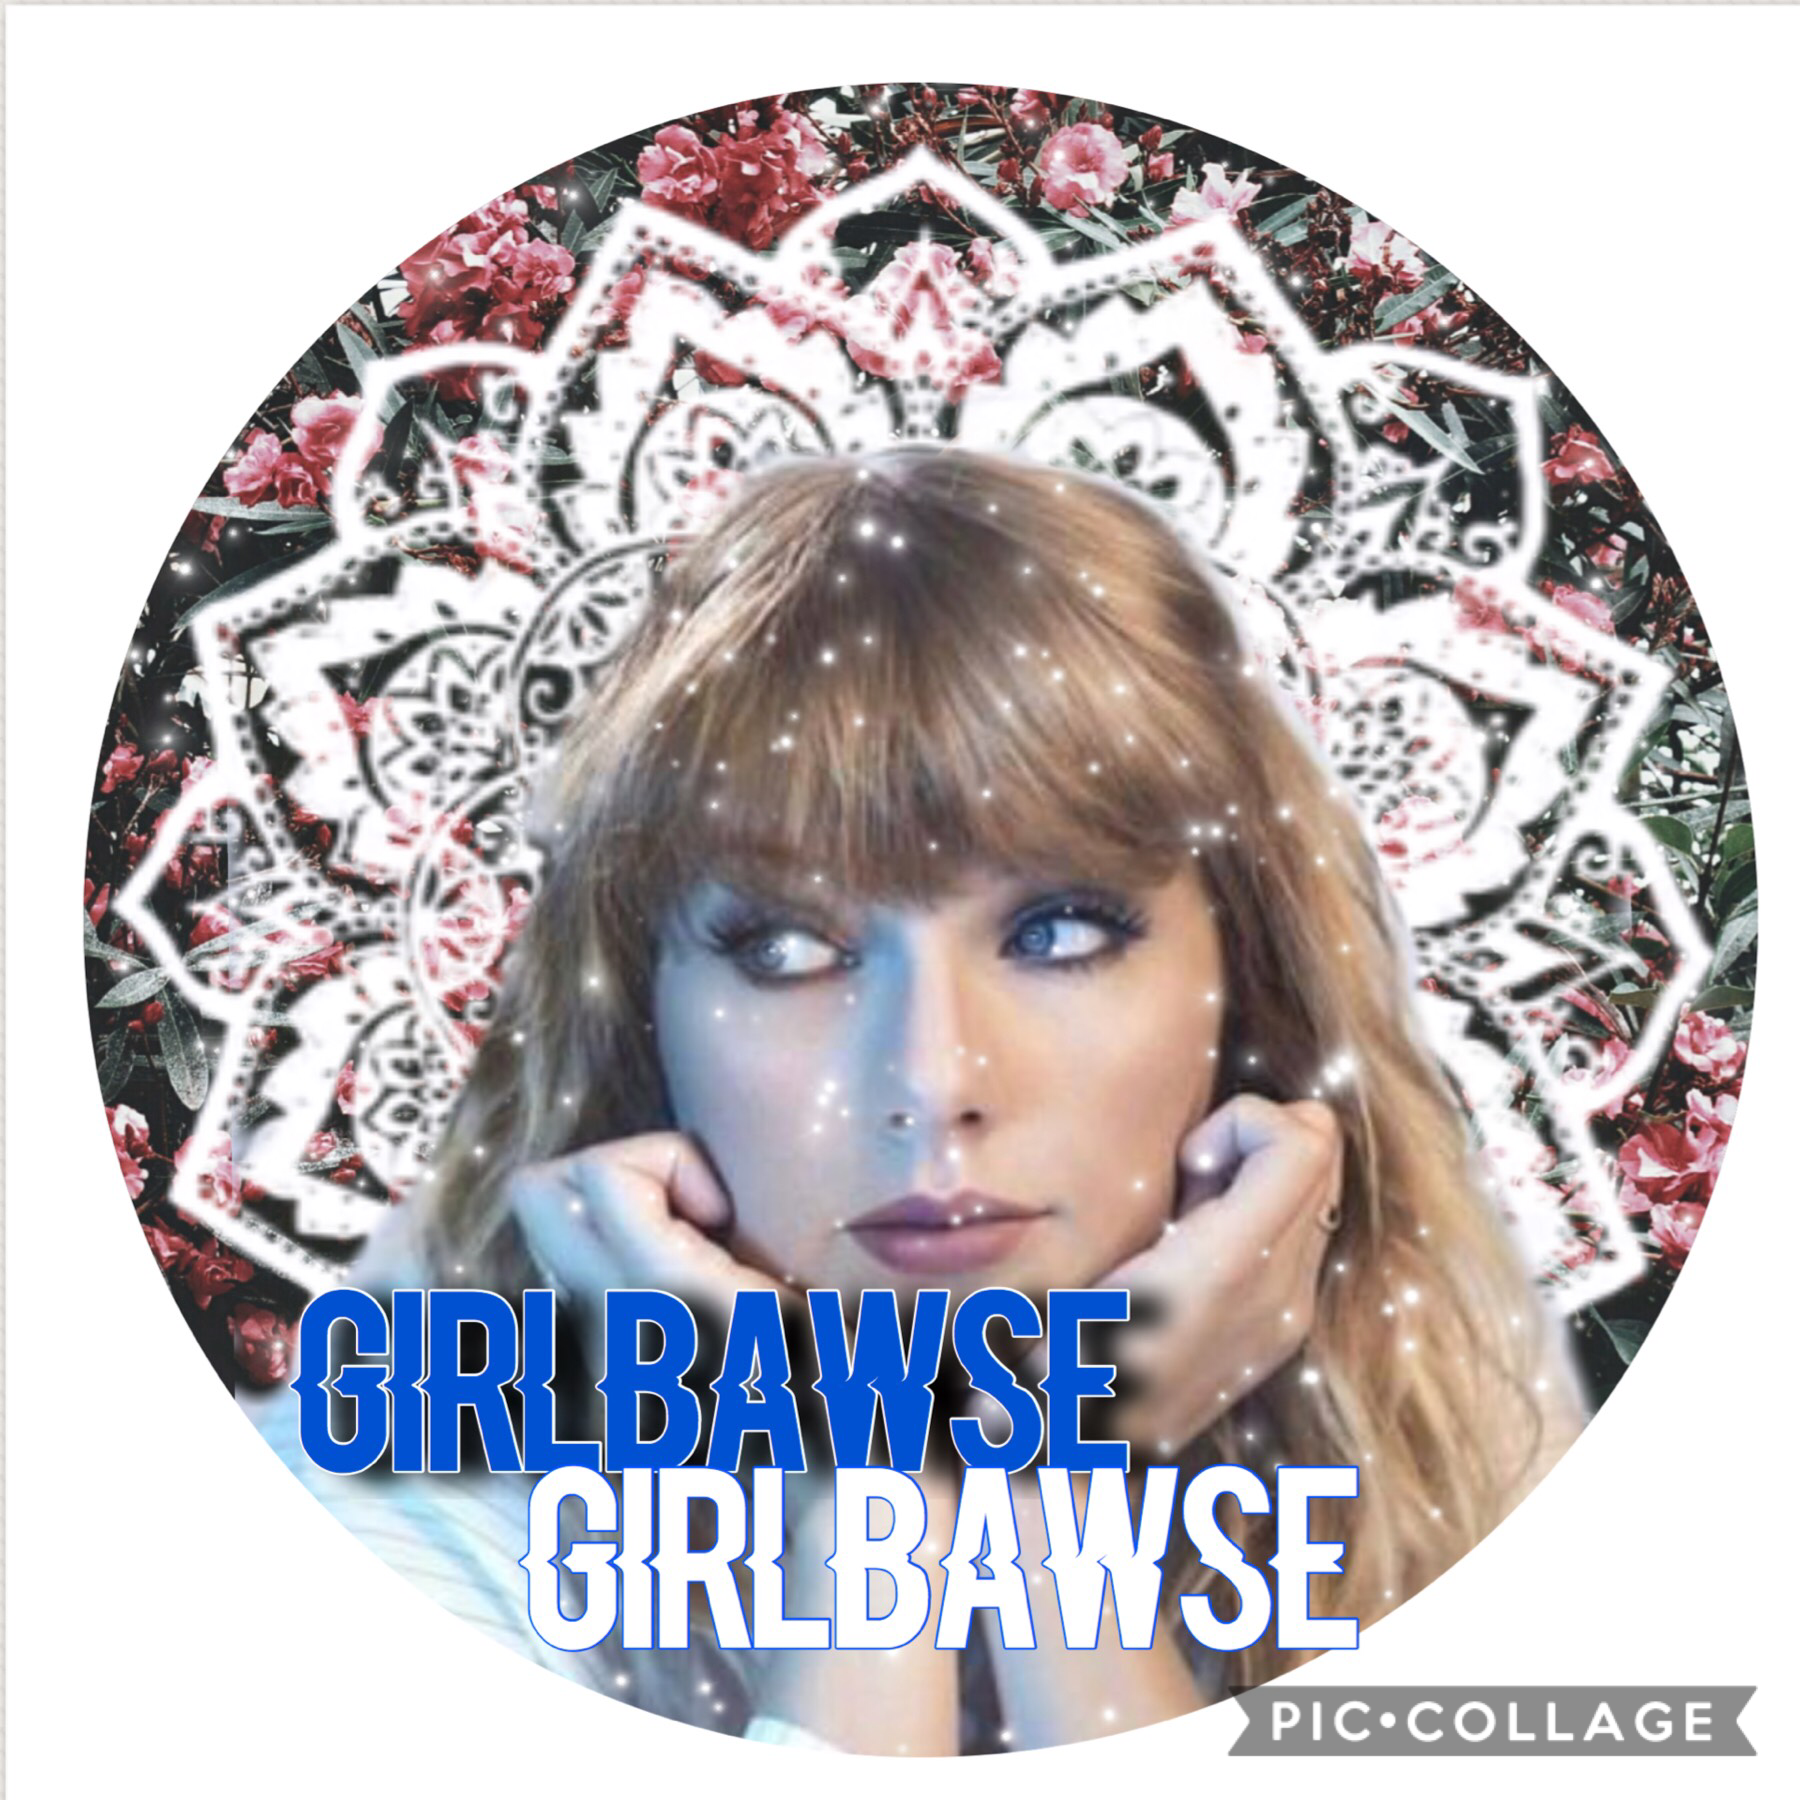 Here is your icon girlbawse I hope that you like it and please give credit❤️❤️
      🌙mxxnlight tutorials 